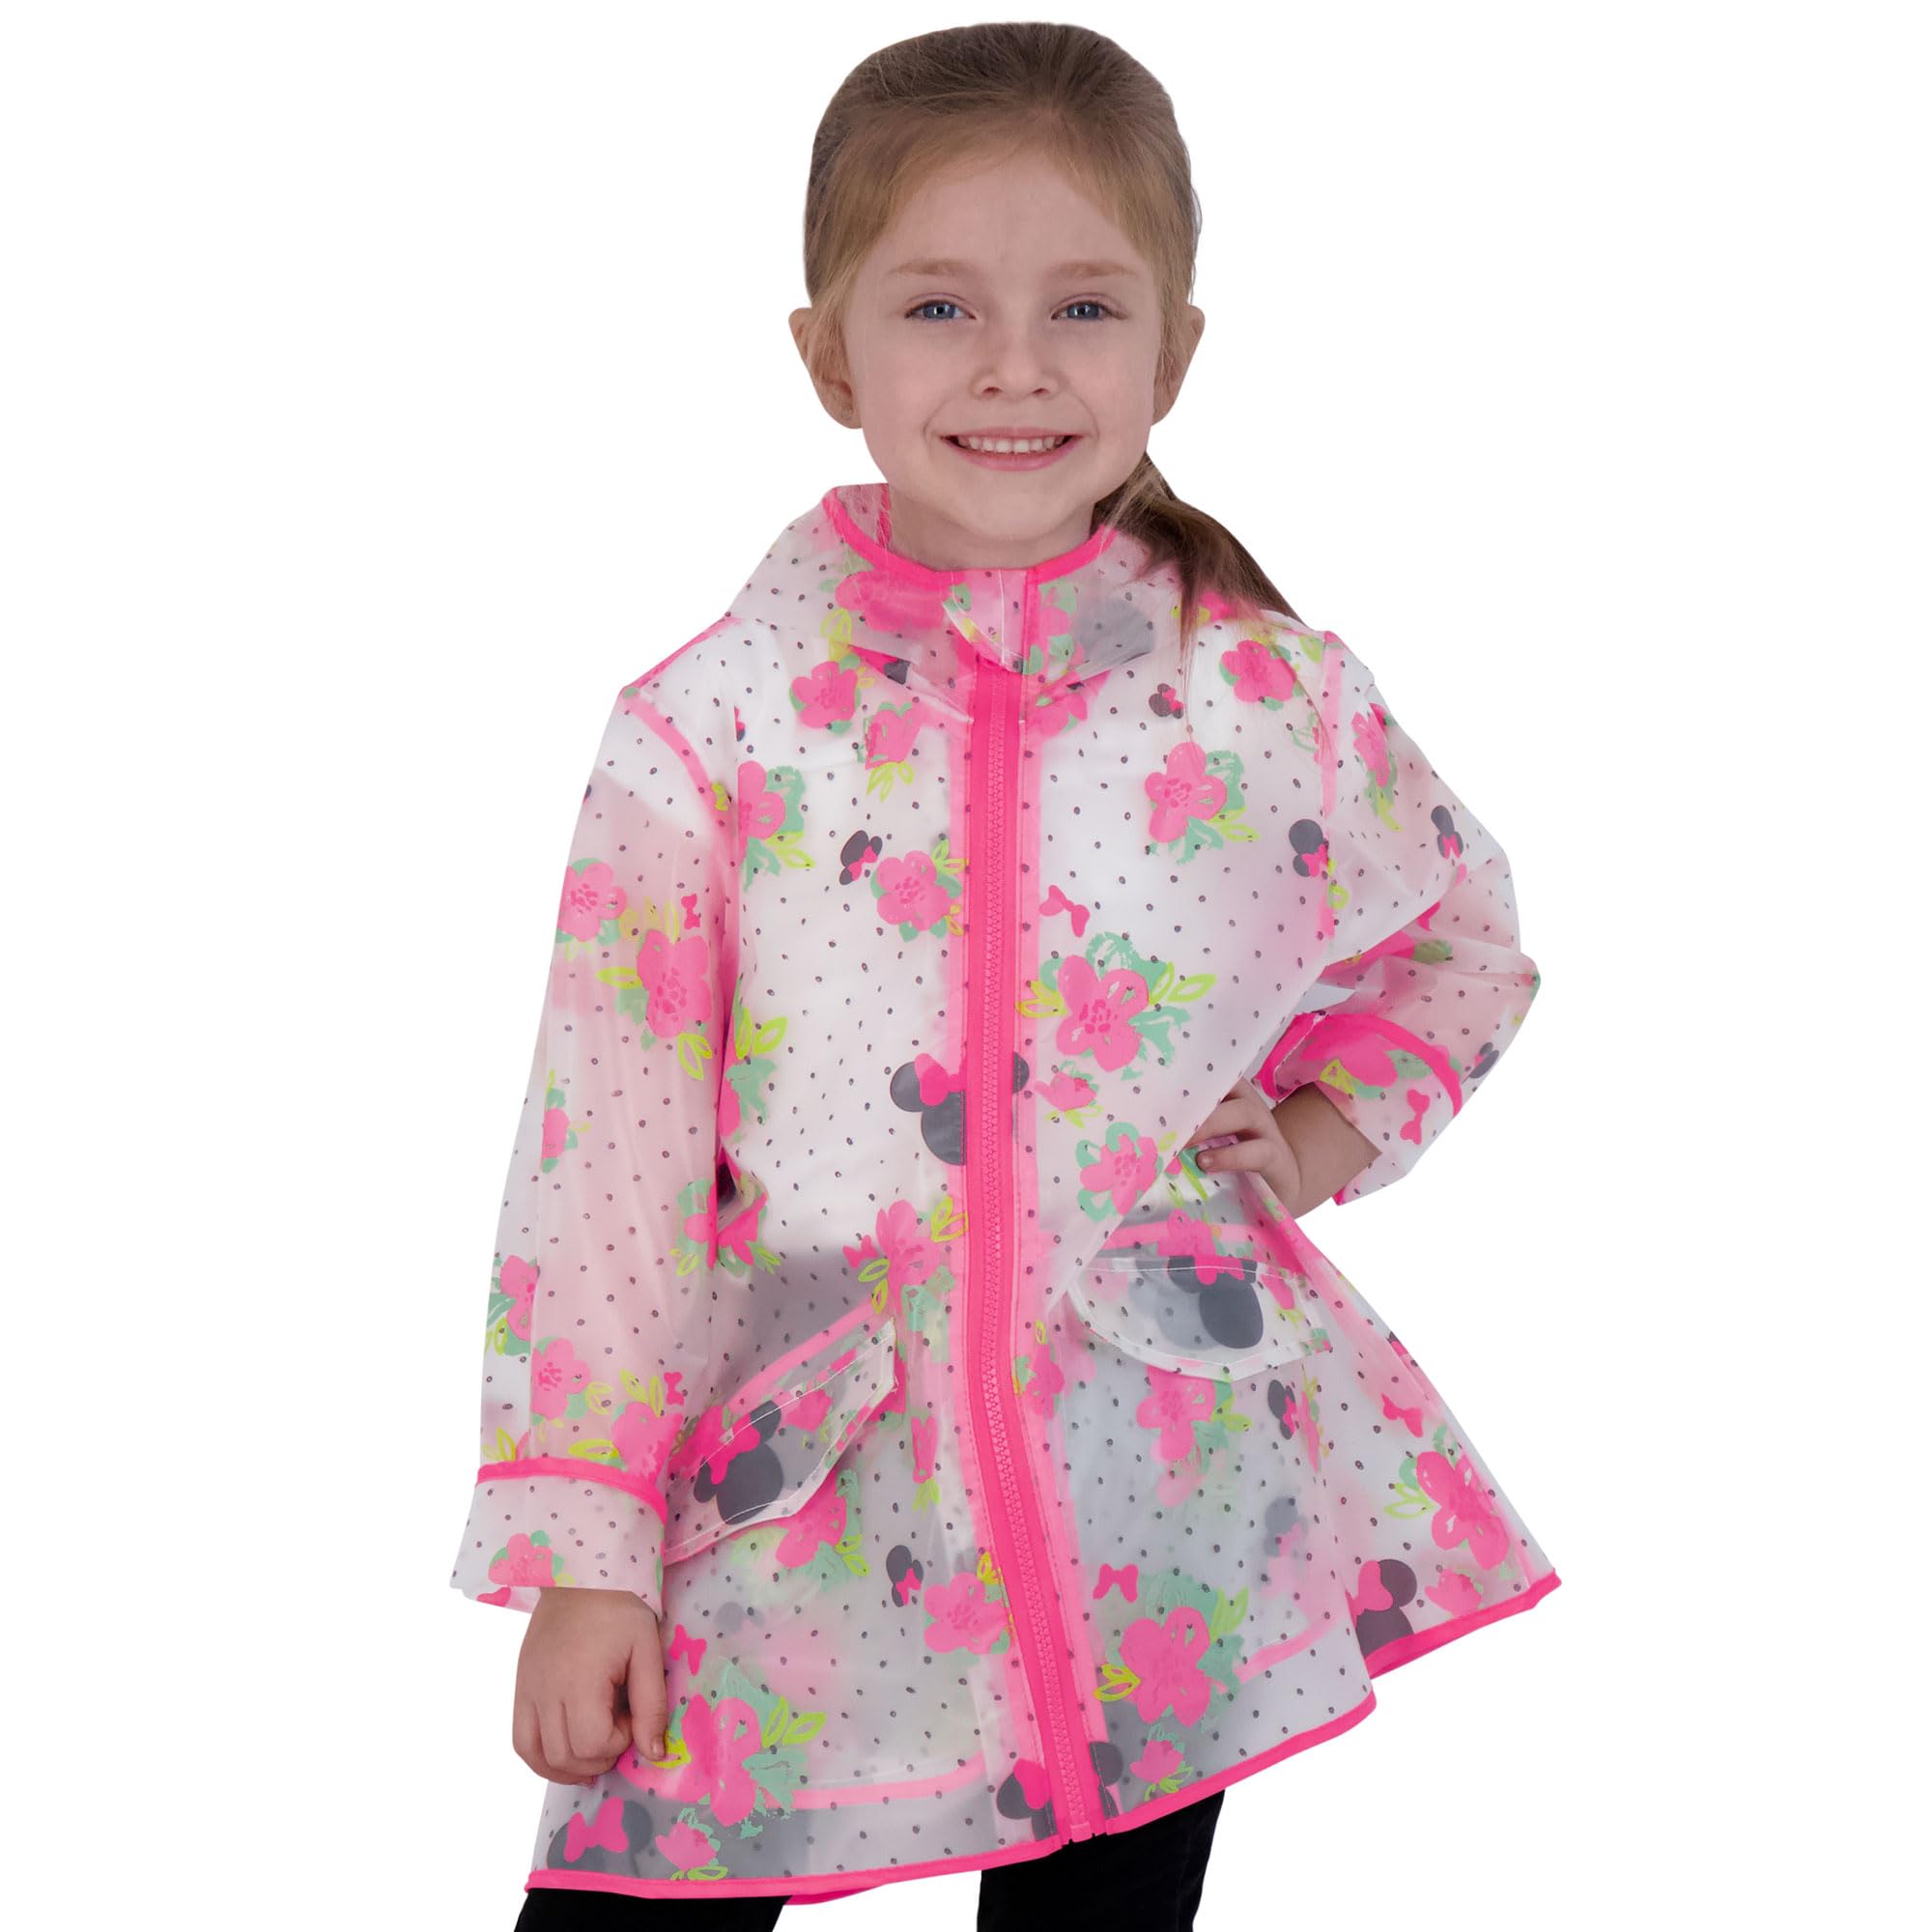 Disney Girls Coat Minnie Mouse Or Princess Toddler Raincoat for Kids 2-7 Years-Rain Poncho Clear with Hood